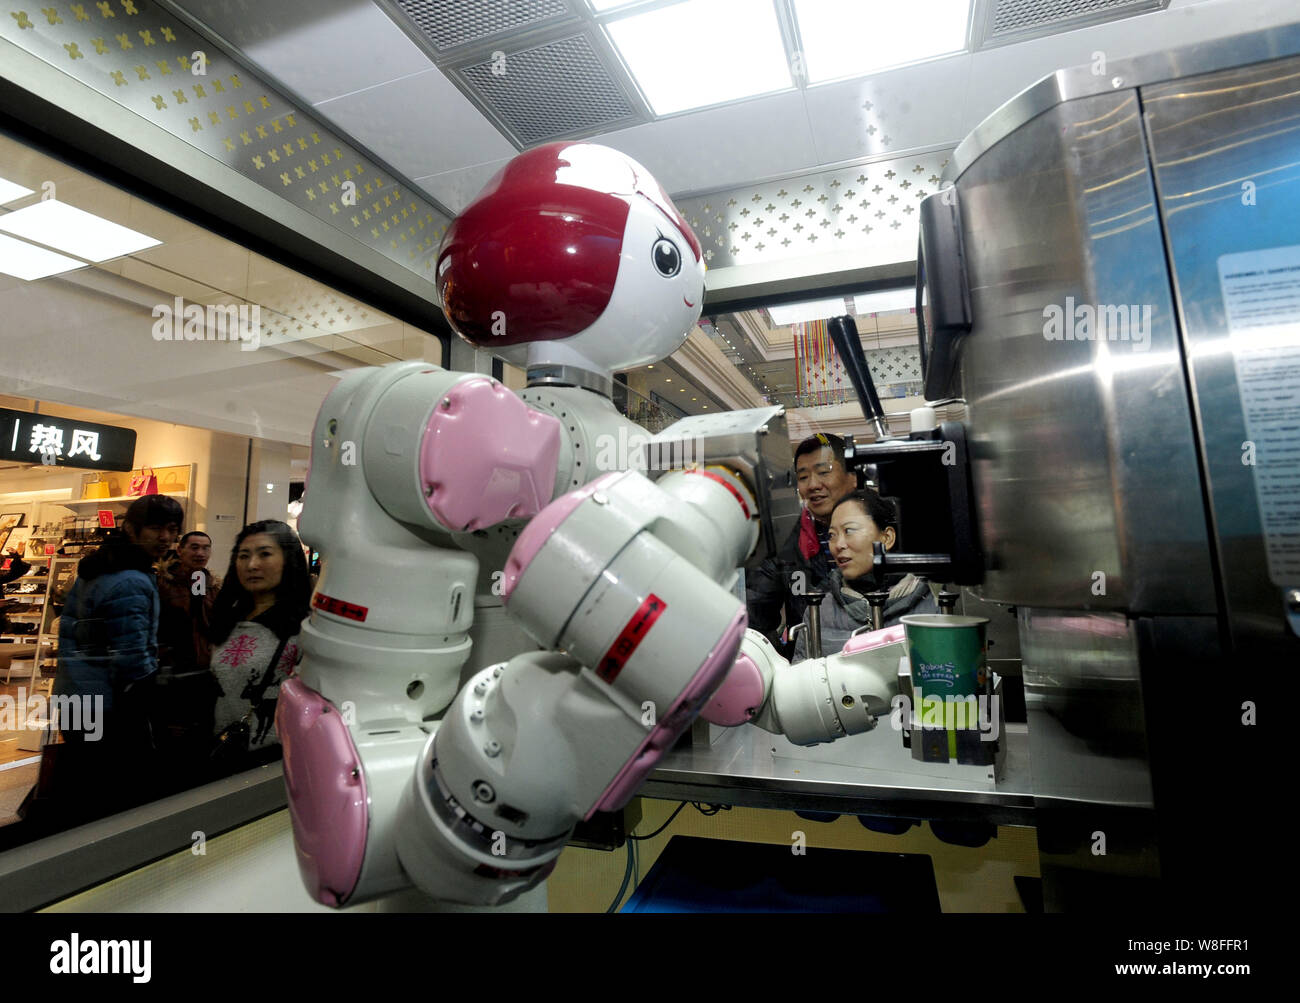 A robot makes ice cream in a kiosk at a shopping mall in Shenyang city,  northeast China's Liaoning province, 4 January 2015. Eating ice cream in  the Stock Photo - Alamy